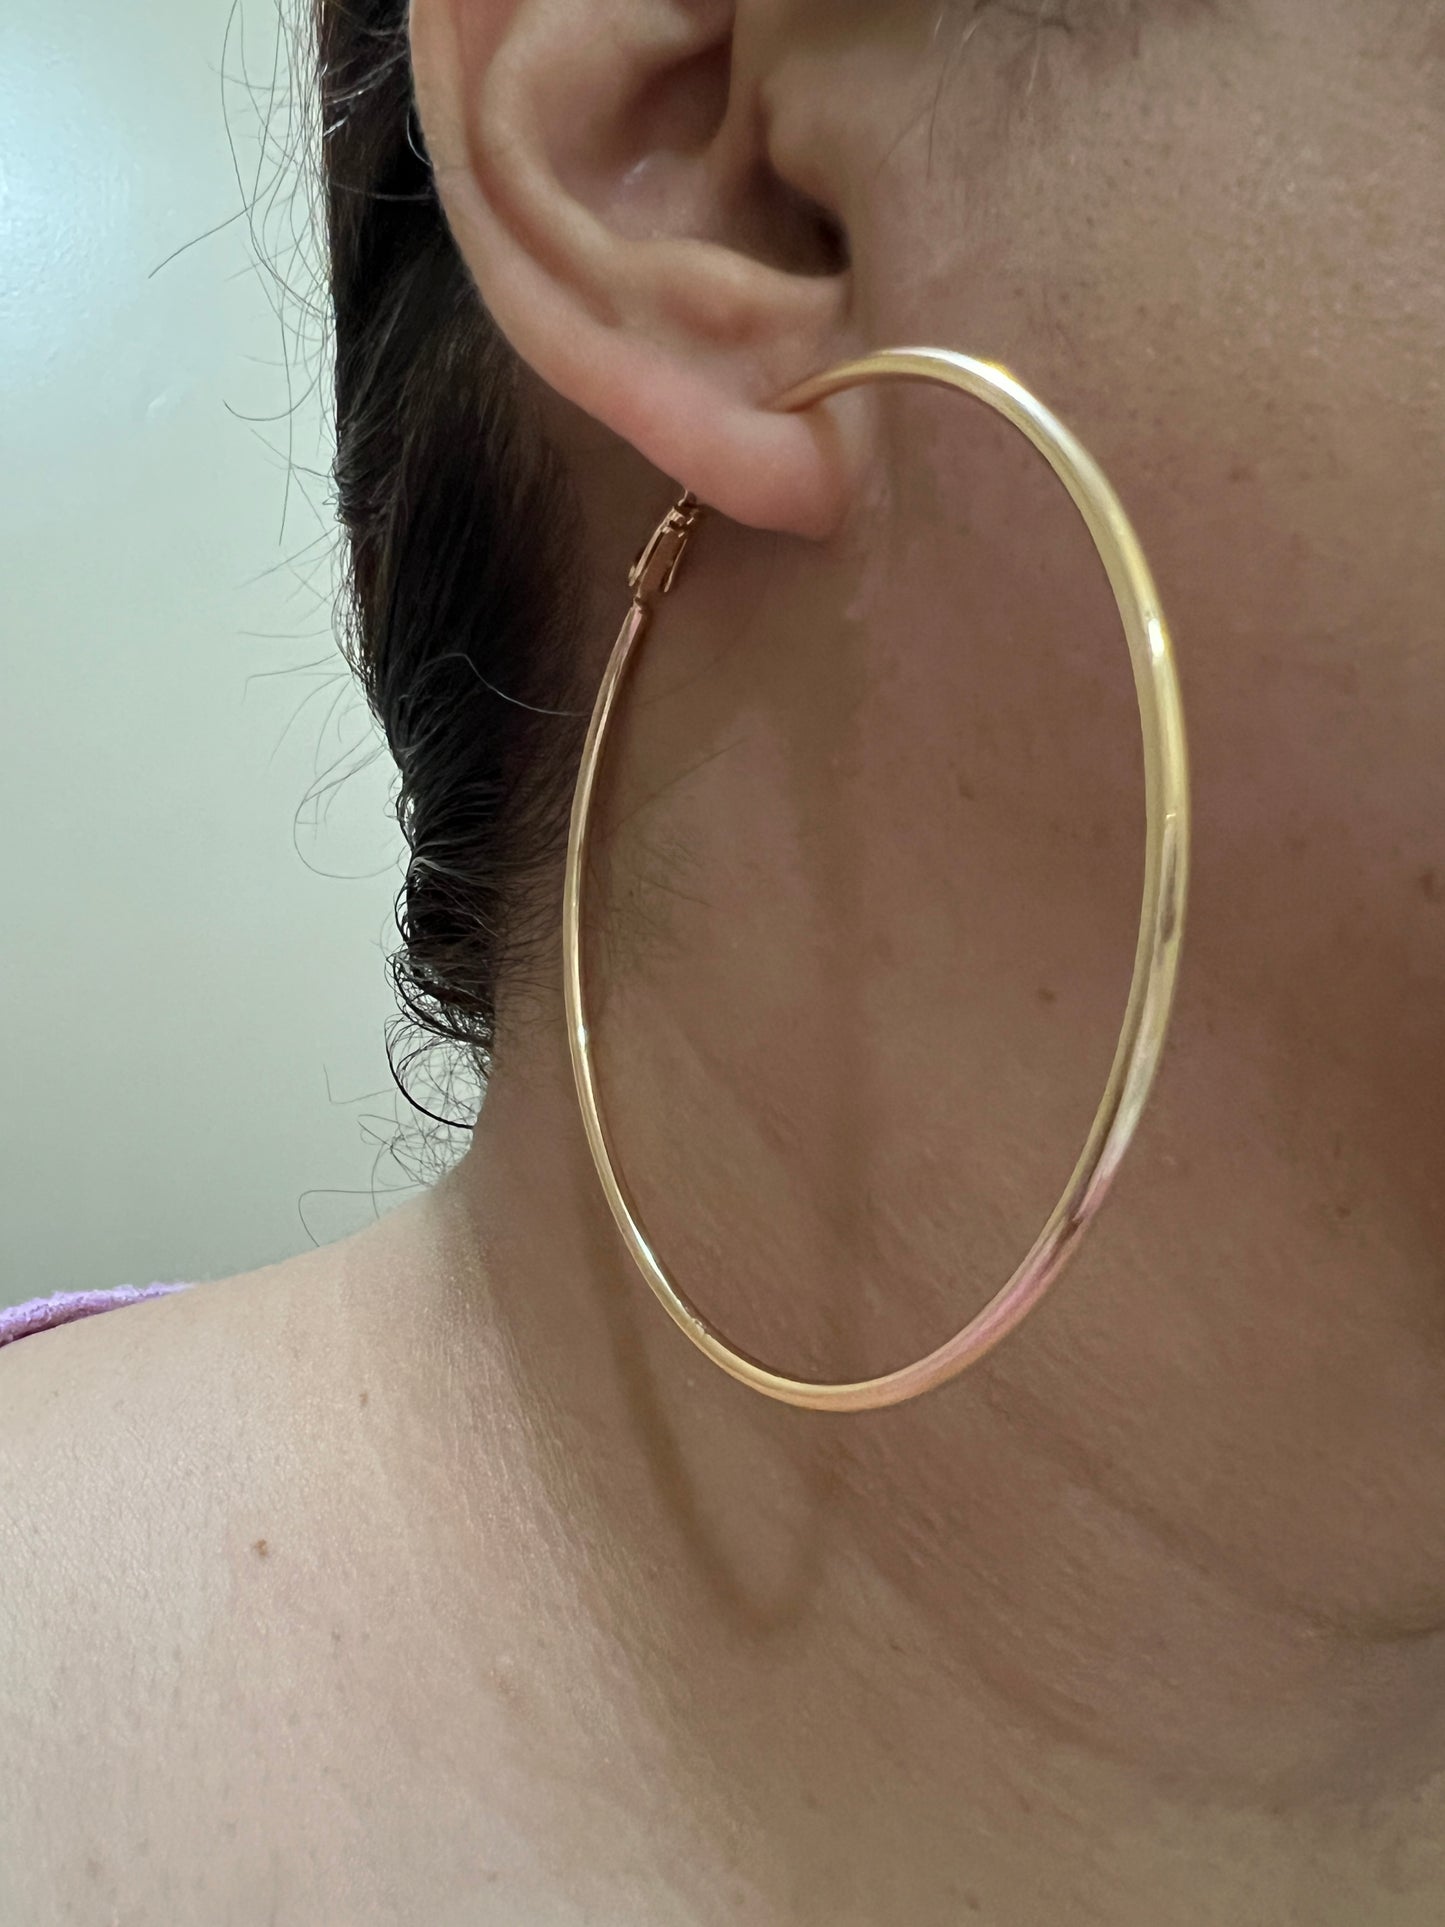 Versatile Chic: 50mm, 70mm, 8mm Simple Hoops Earrings – Timeless Accessories for Every Occasion